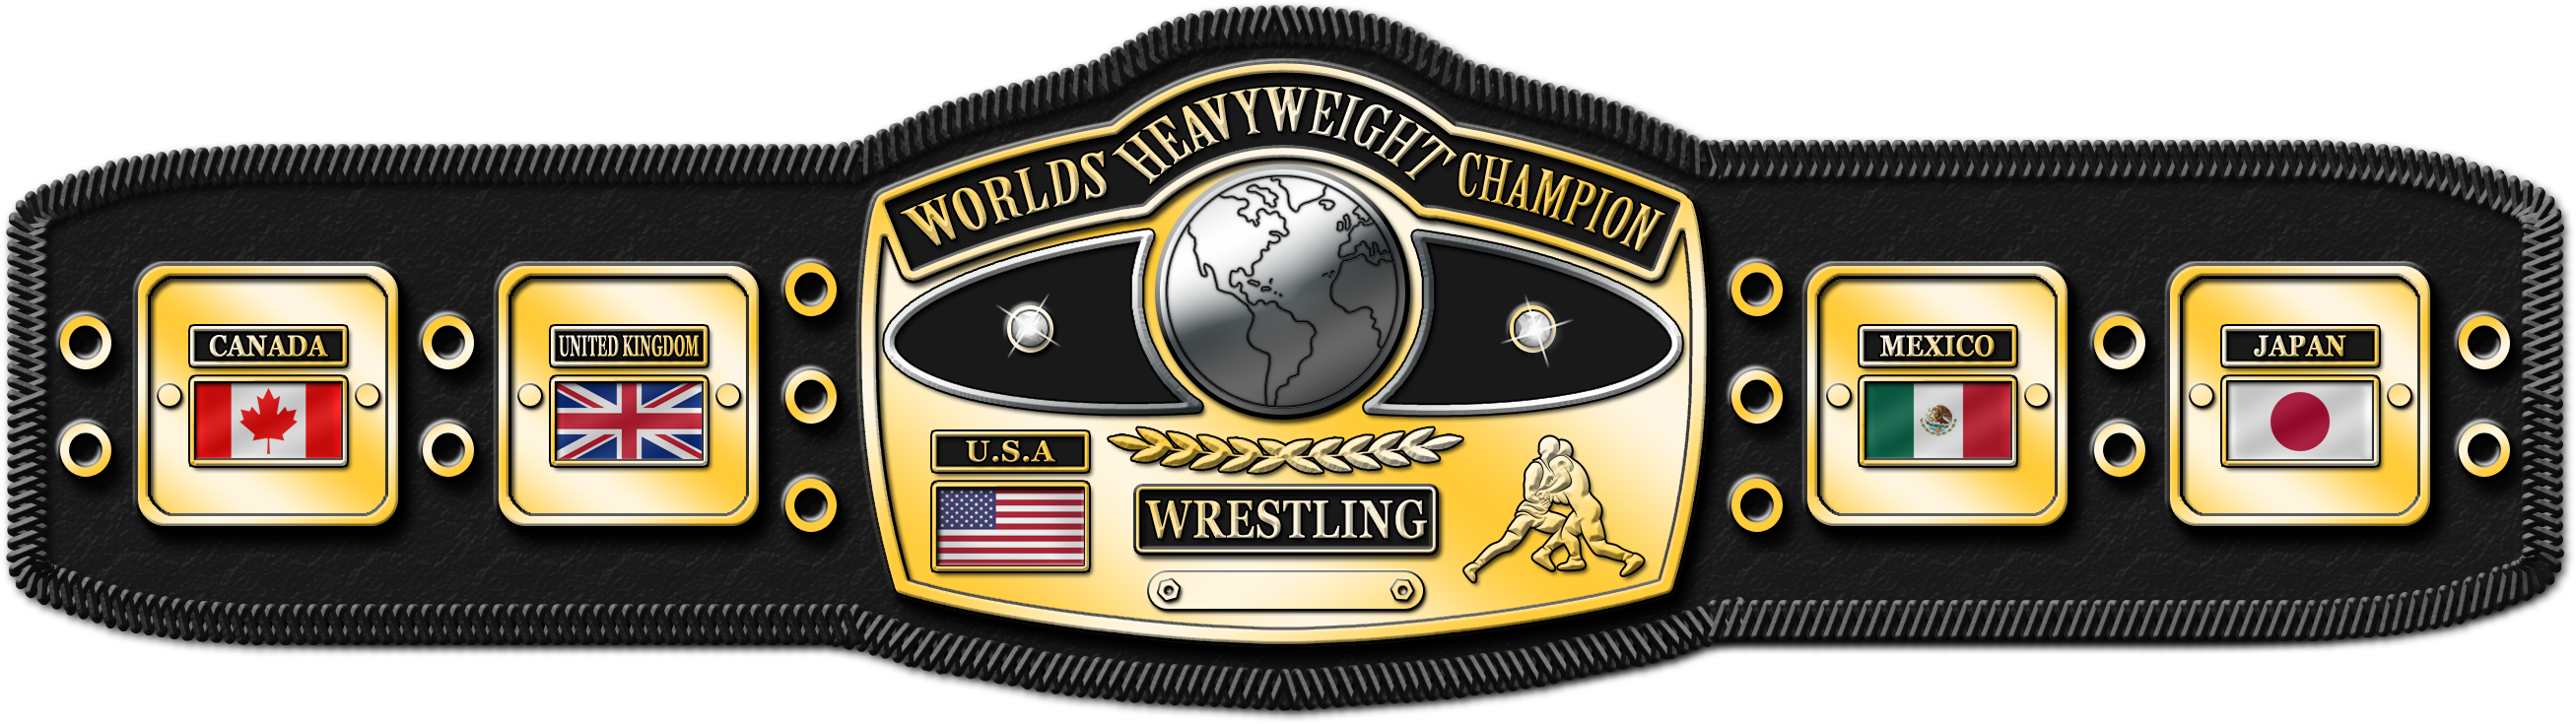 Non-branded version of the 10lbs title